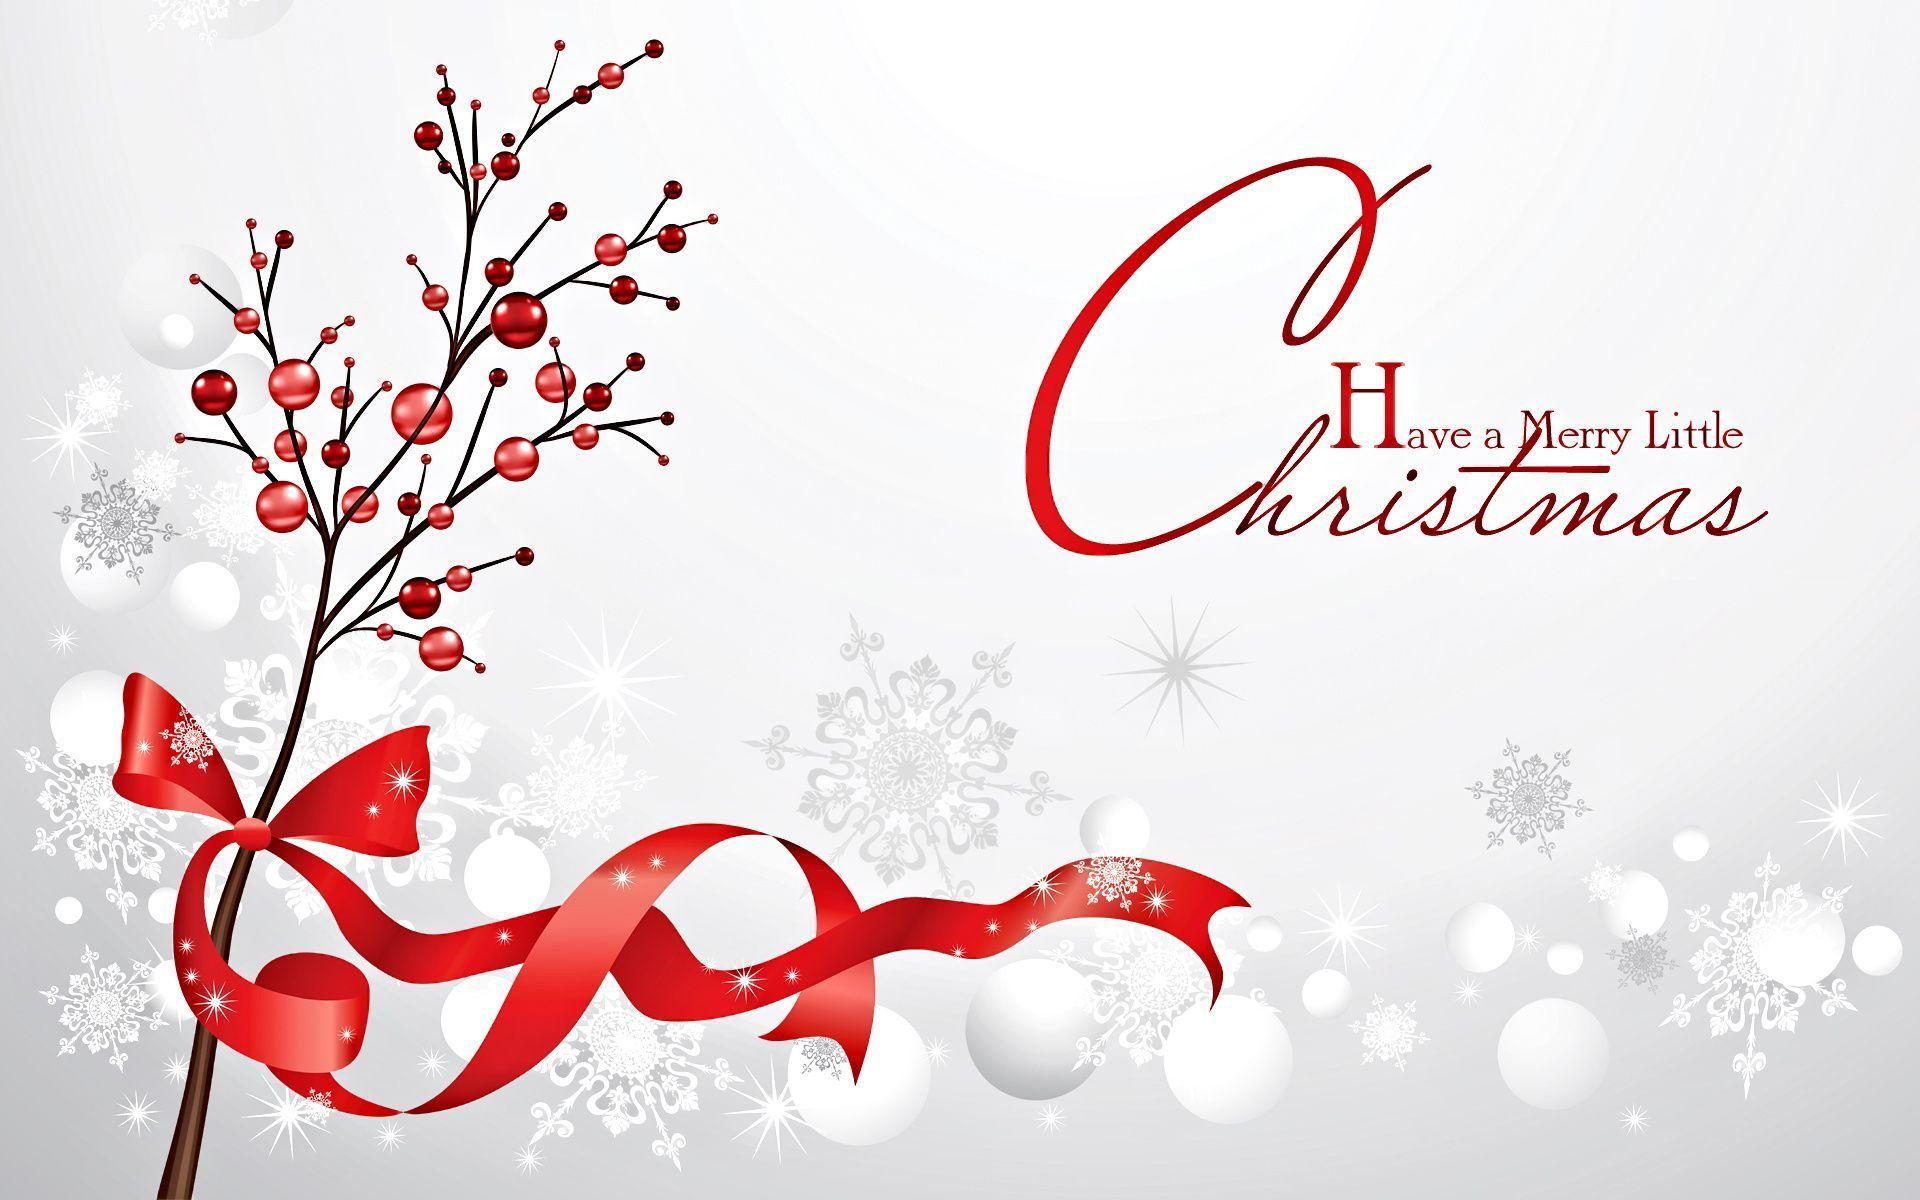 Most Wonderful Merry Christmas Wishes, Wallpaper And Greeting